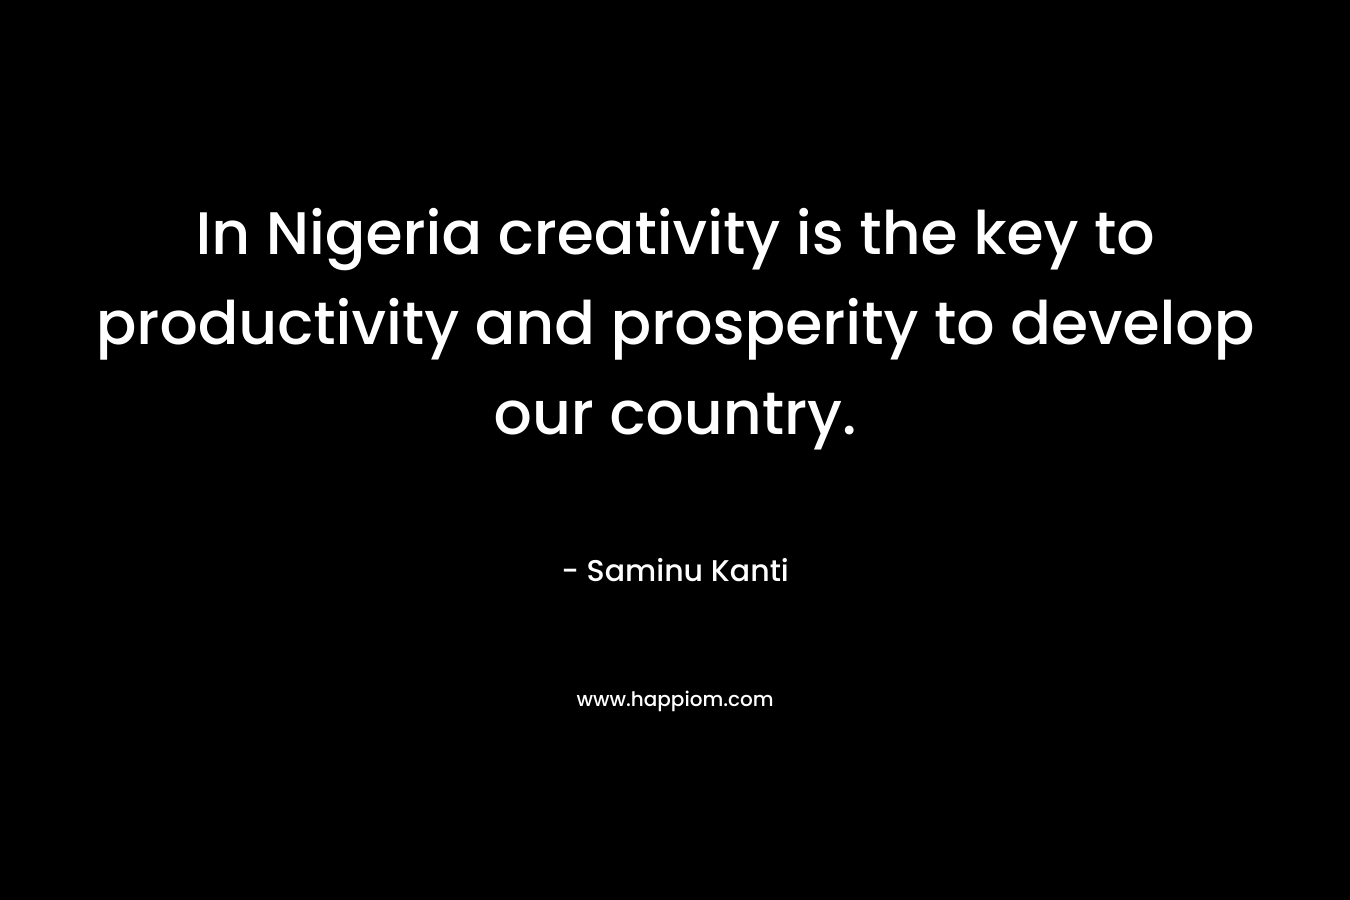 In Nigeria creativity is the key to productivity and prosperity to develop our country.